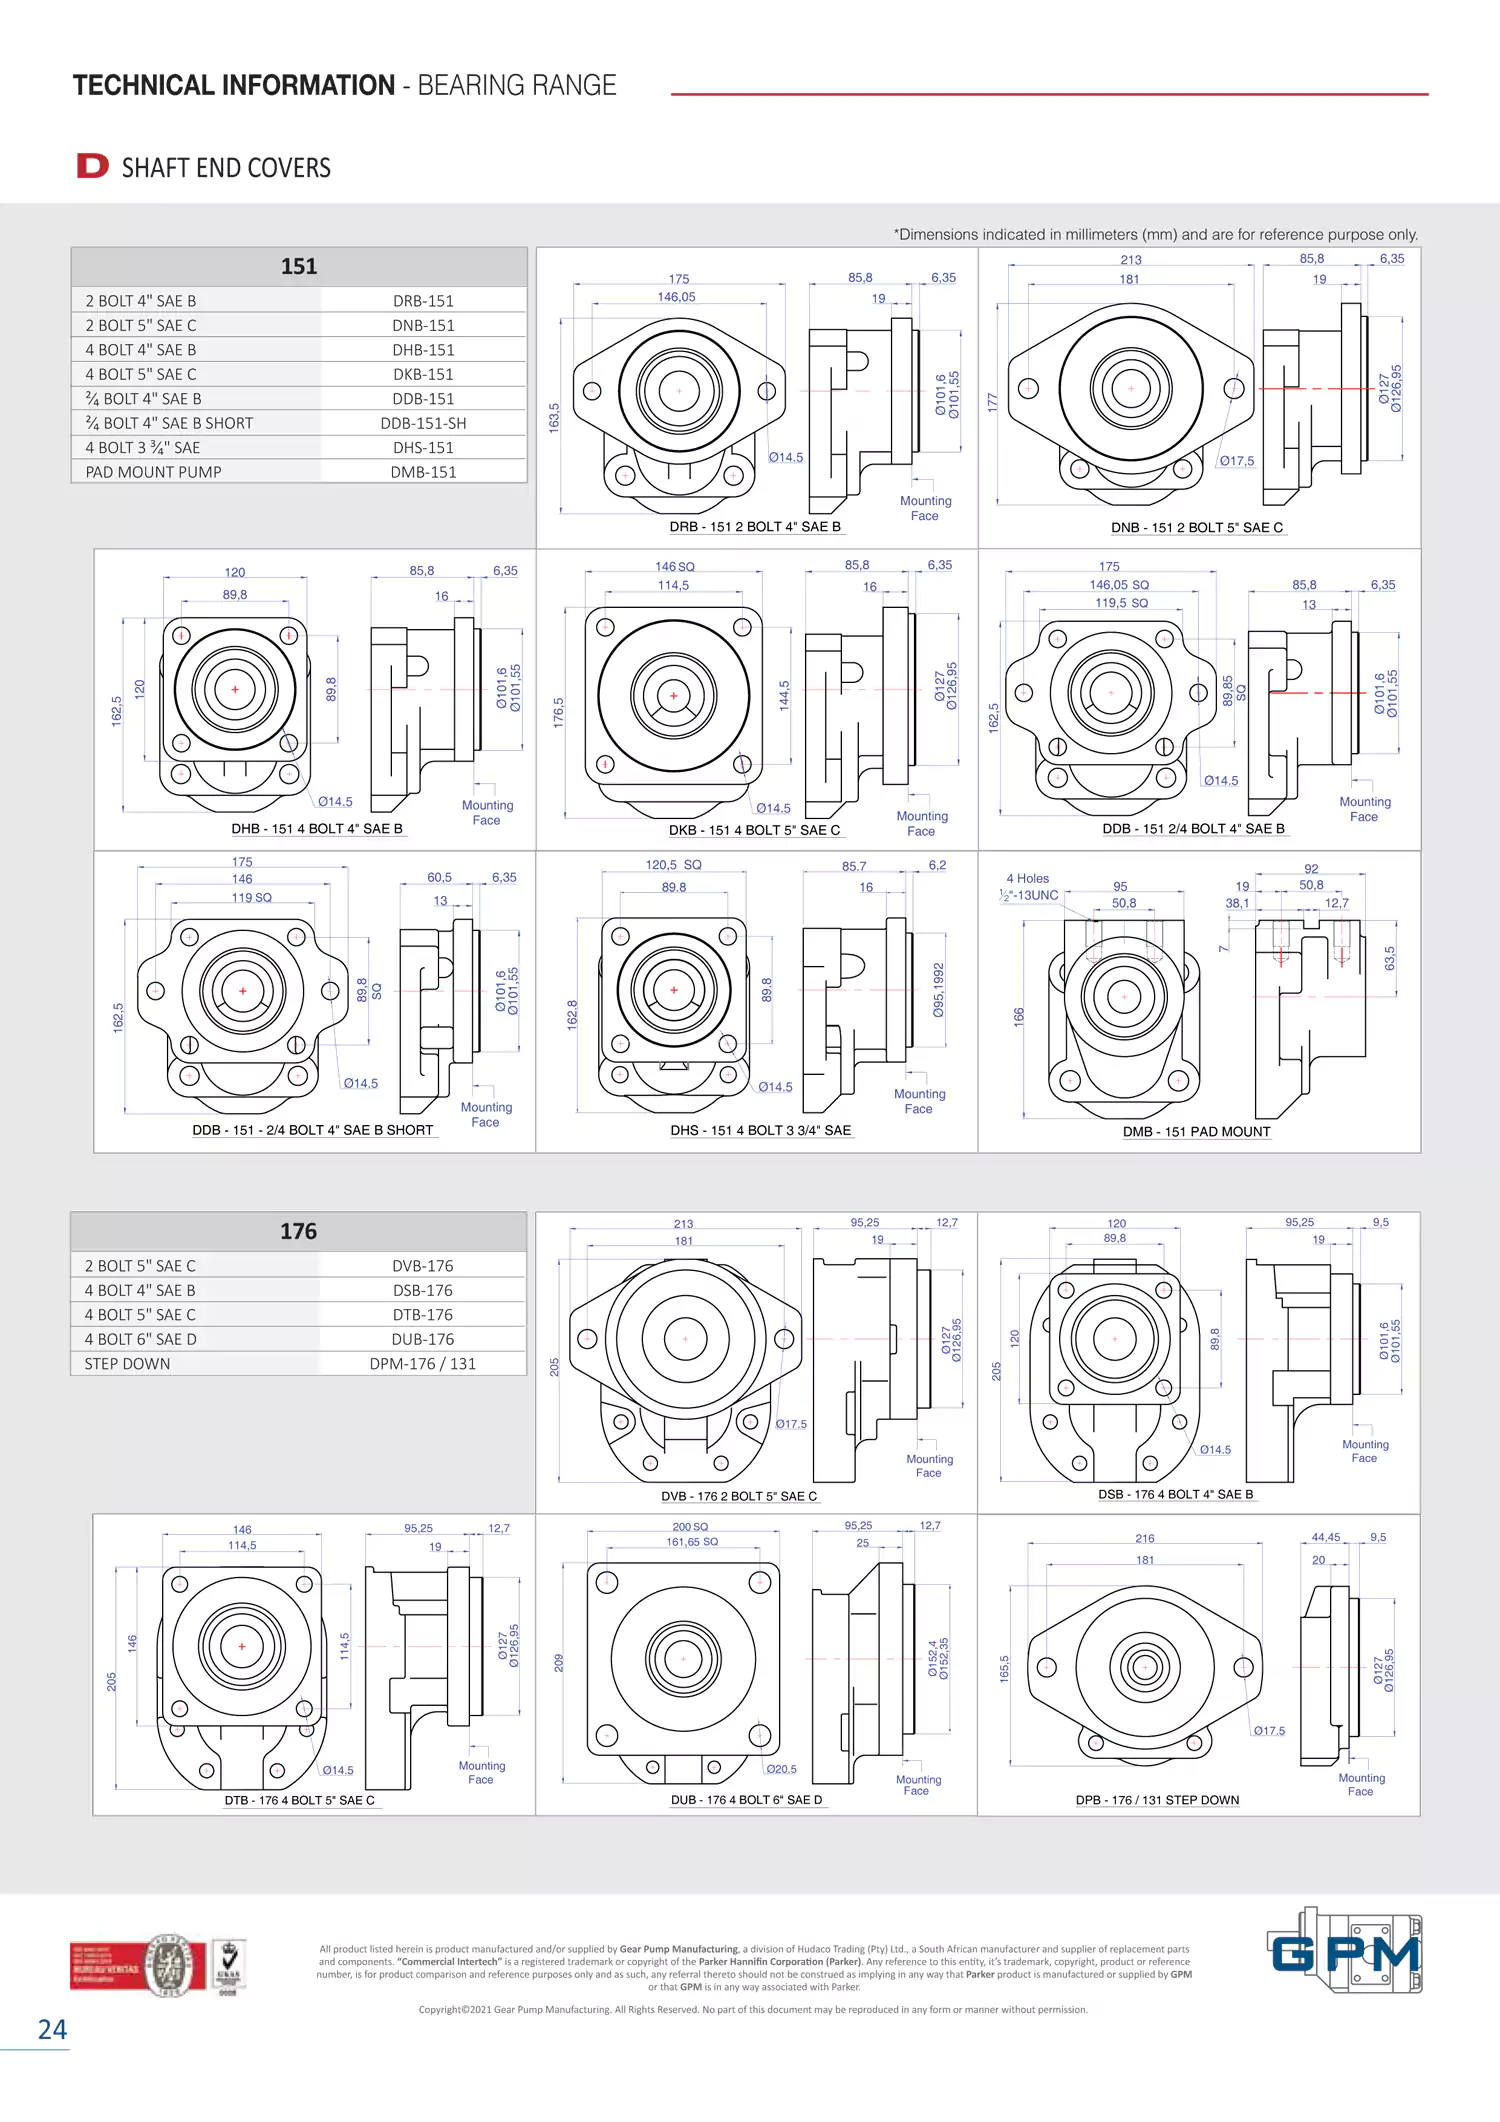 Page-24 - Technical Information - Bearing Range - Shaft End Covers